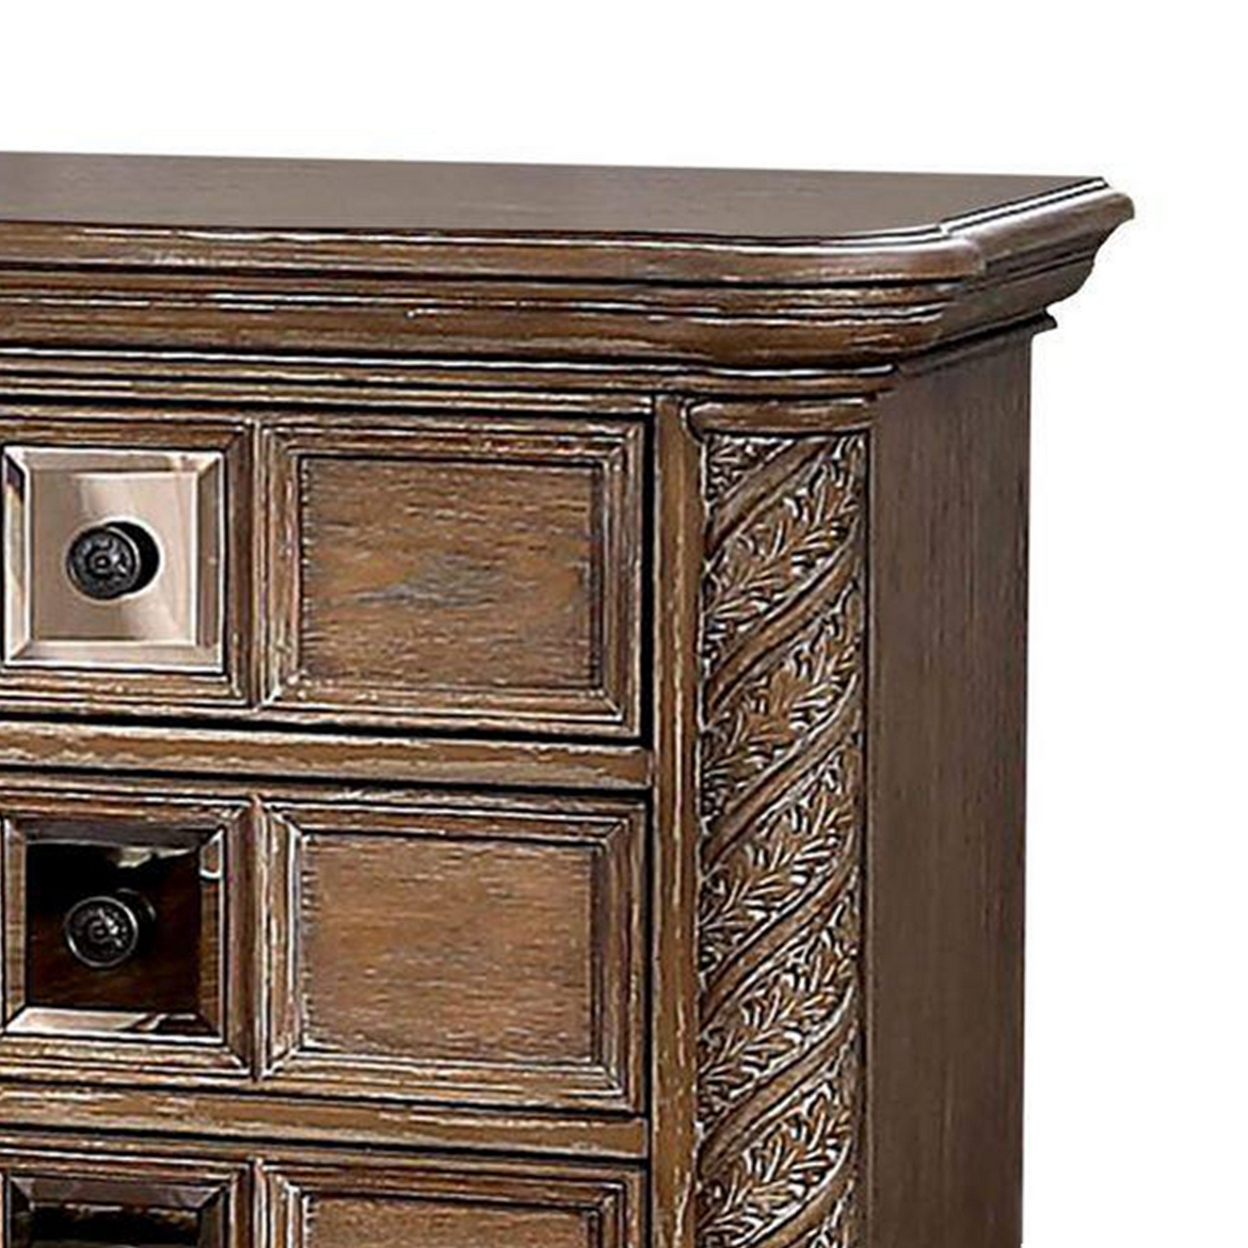 Isac 30 Inch Nightstand, 3 Gliding Drawers, Carved Faux Wood, Rustic Brown- Saltoro Sherpi